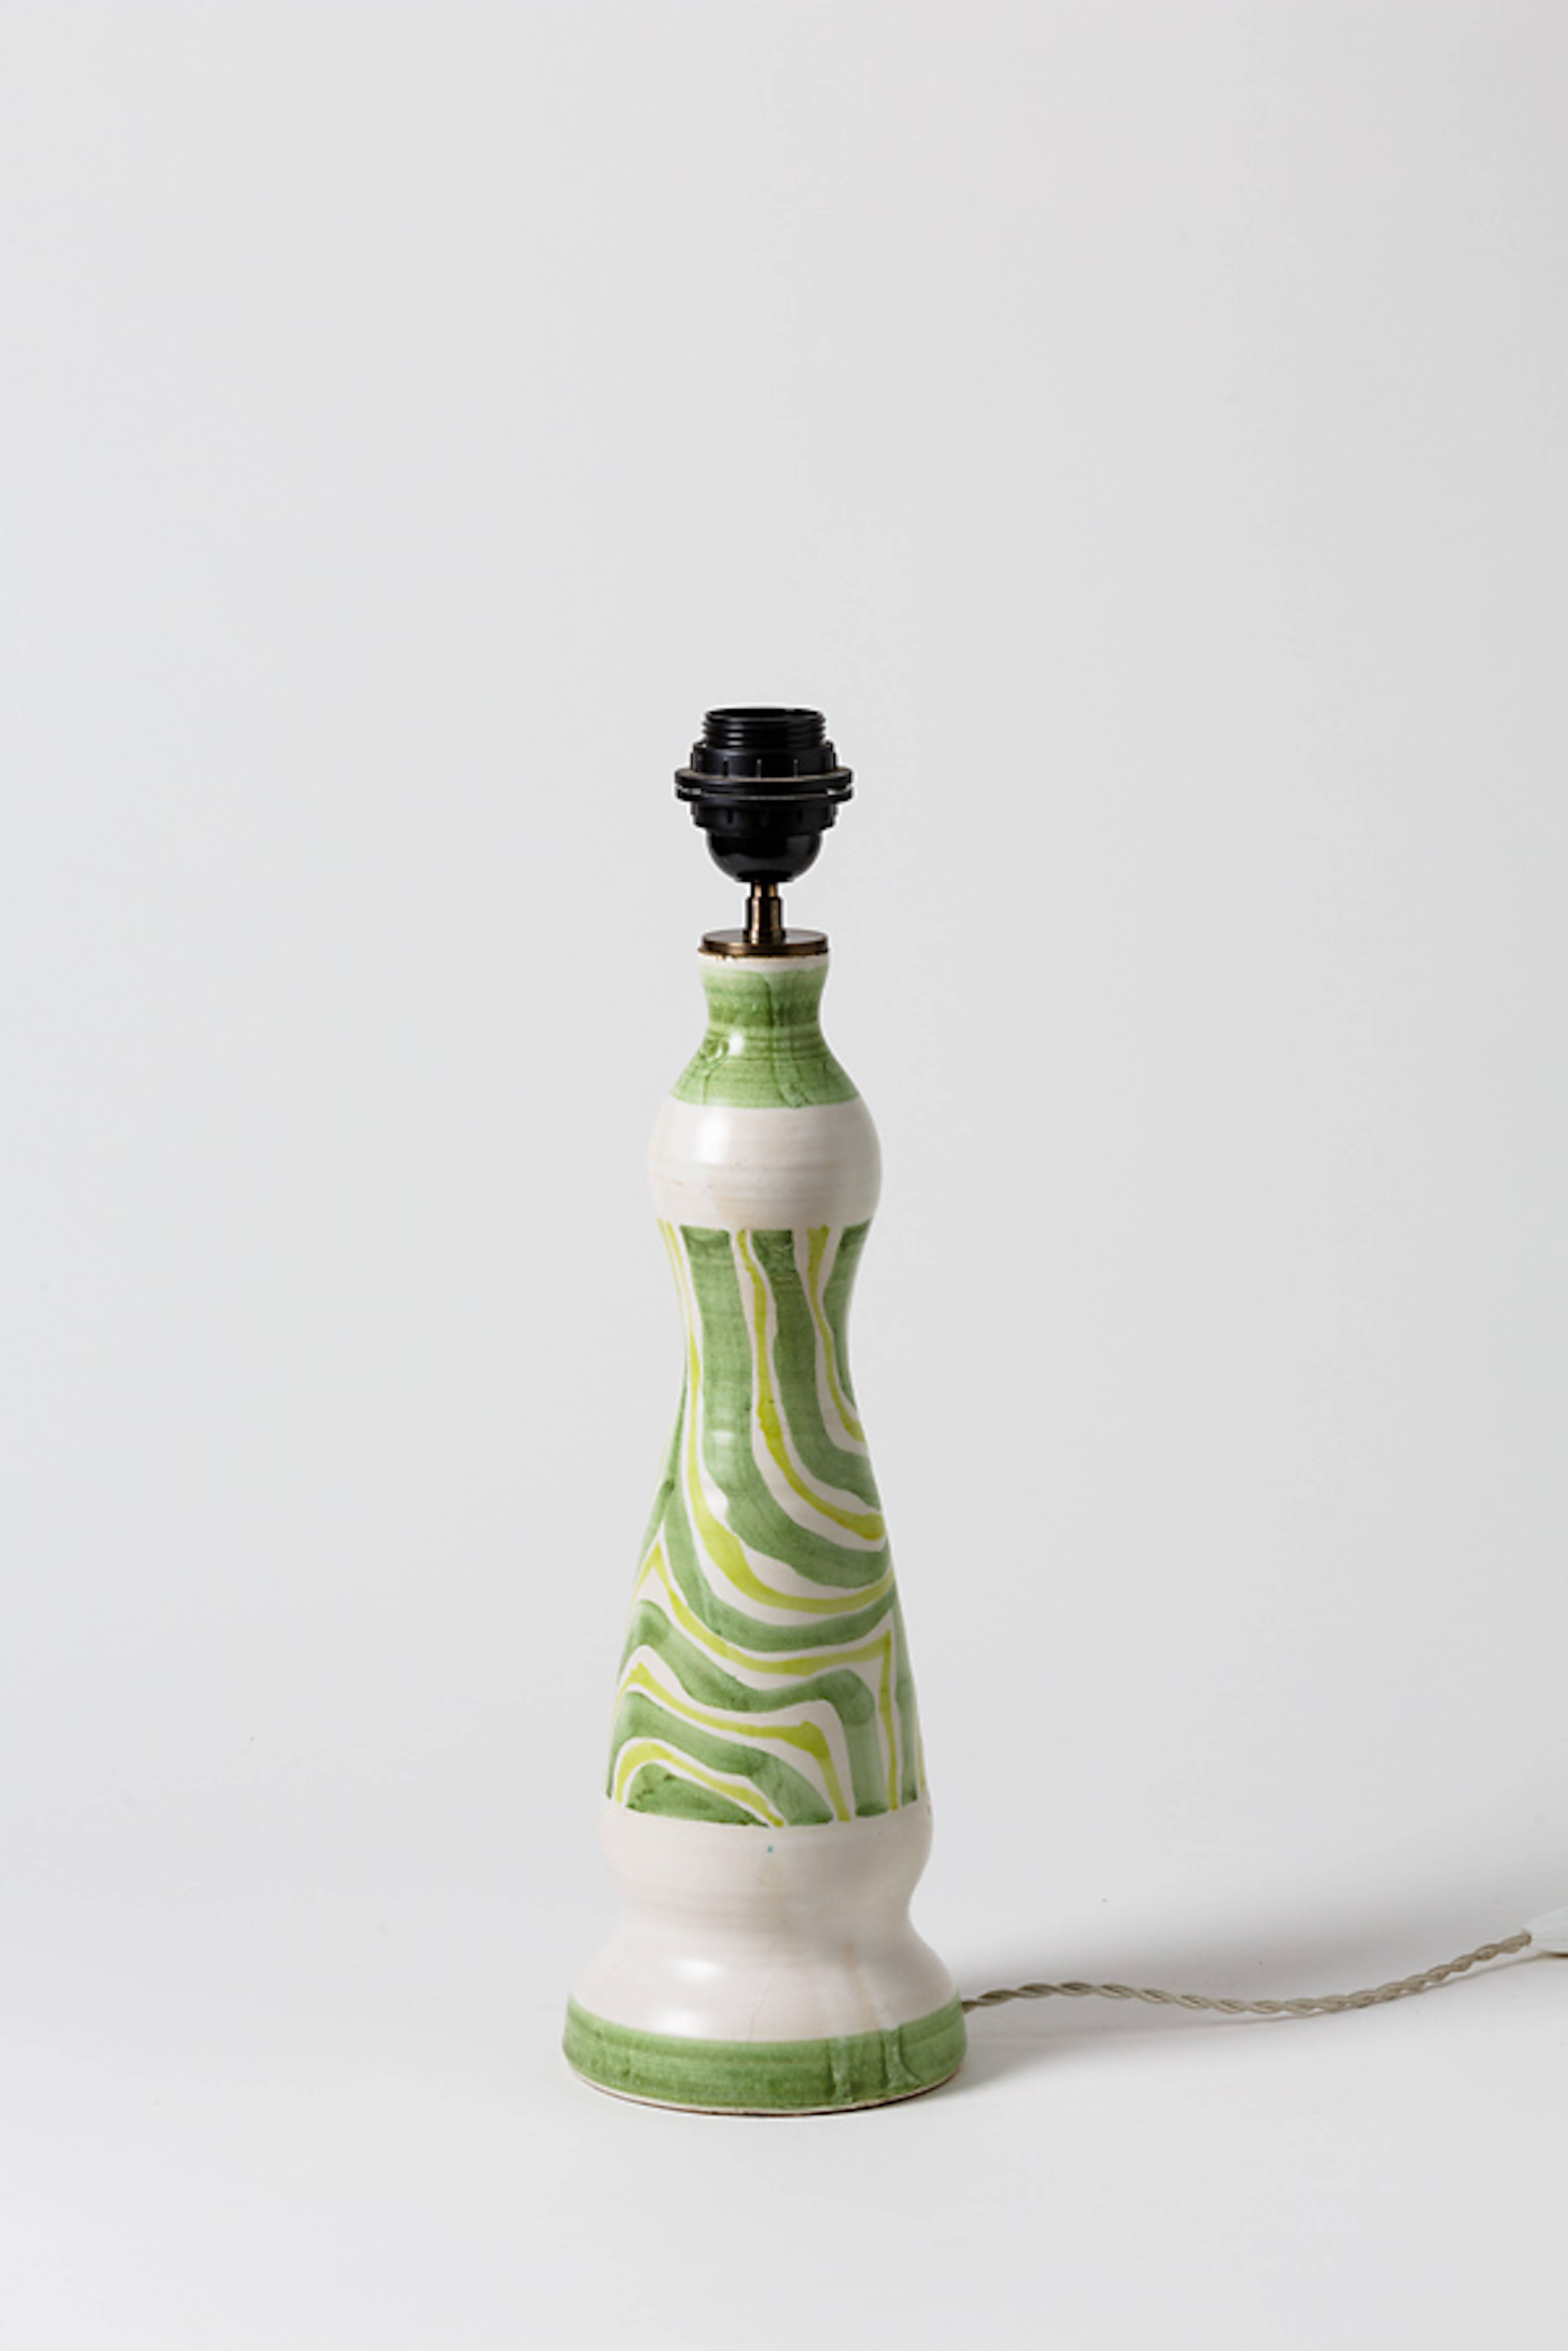 French White and Green Ceramic Lamp by Robert Deblander, circa 1960 For Sale